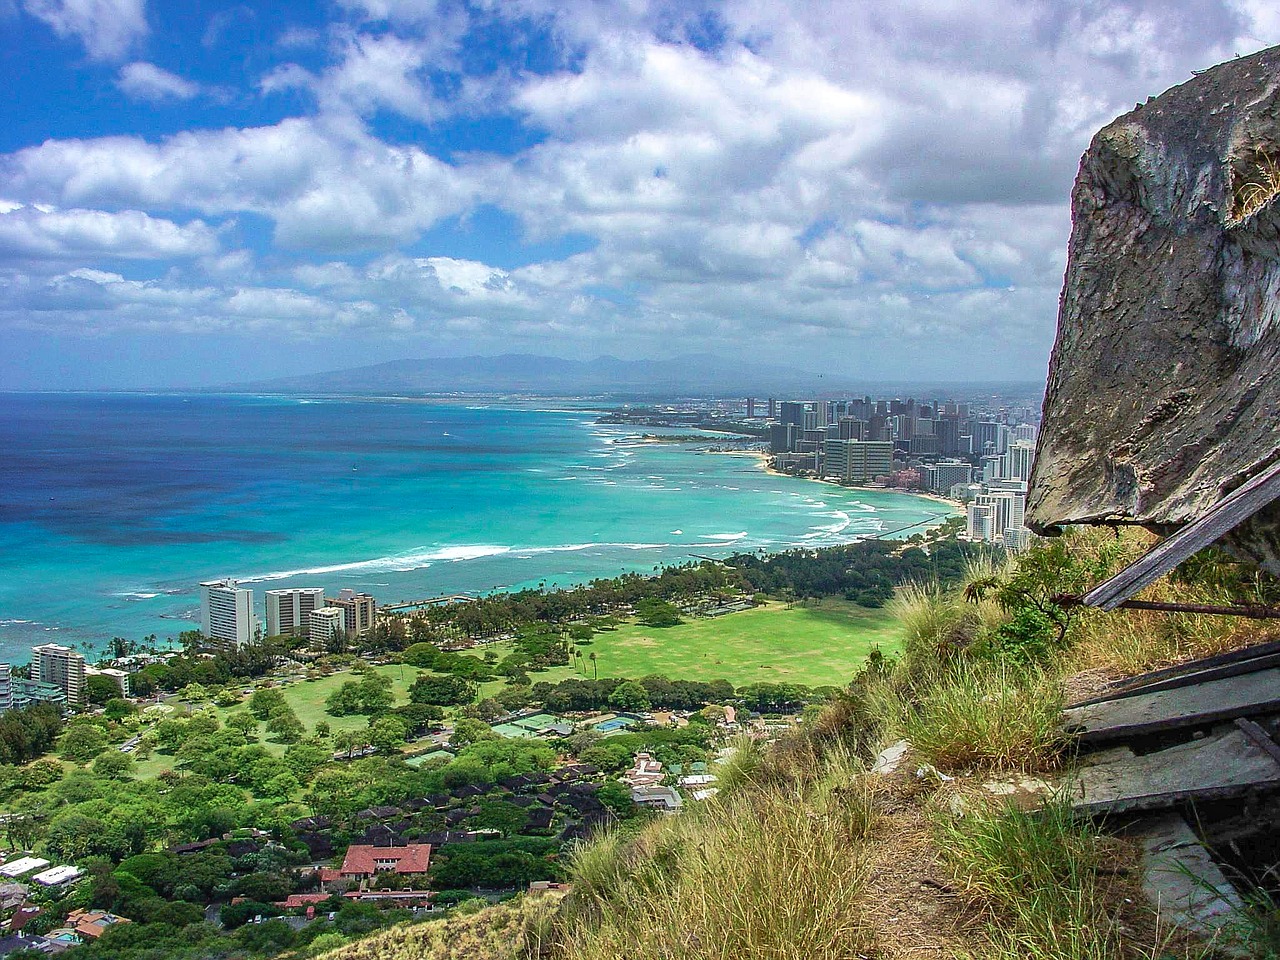 4 Low-Cost Activities You Can Do While on Vacation in Hawaii